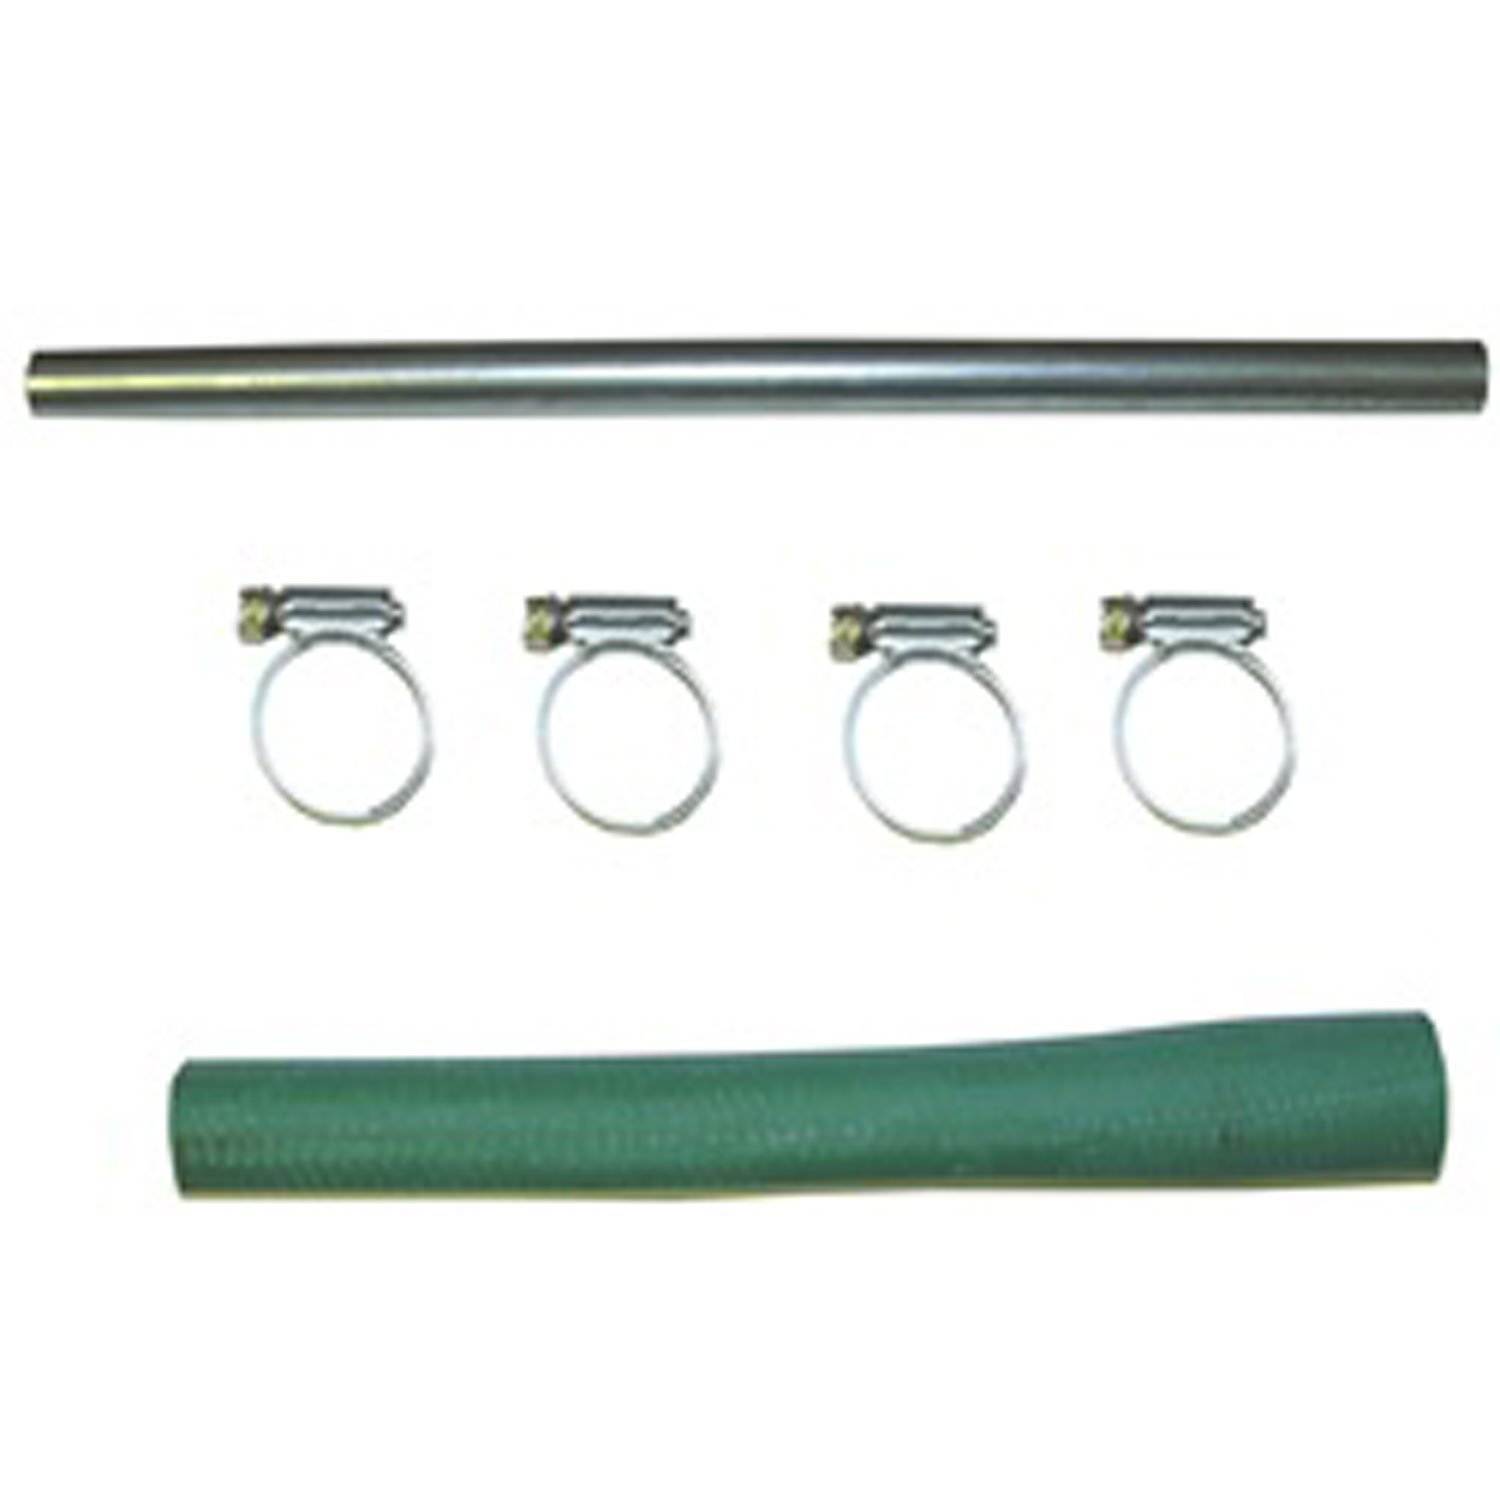 This air tube converter kit from Omix-ADA fits 84-86 Jeep CJ7 84-86 CJ8 and 87-90 Wrangler YJ .